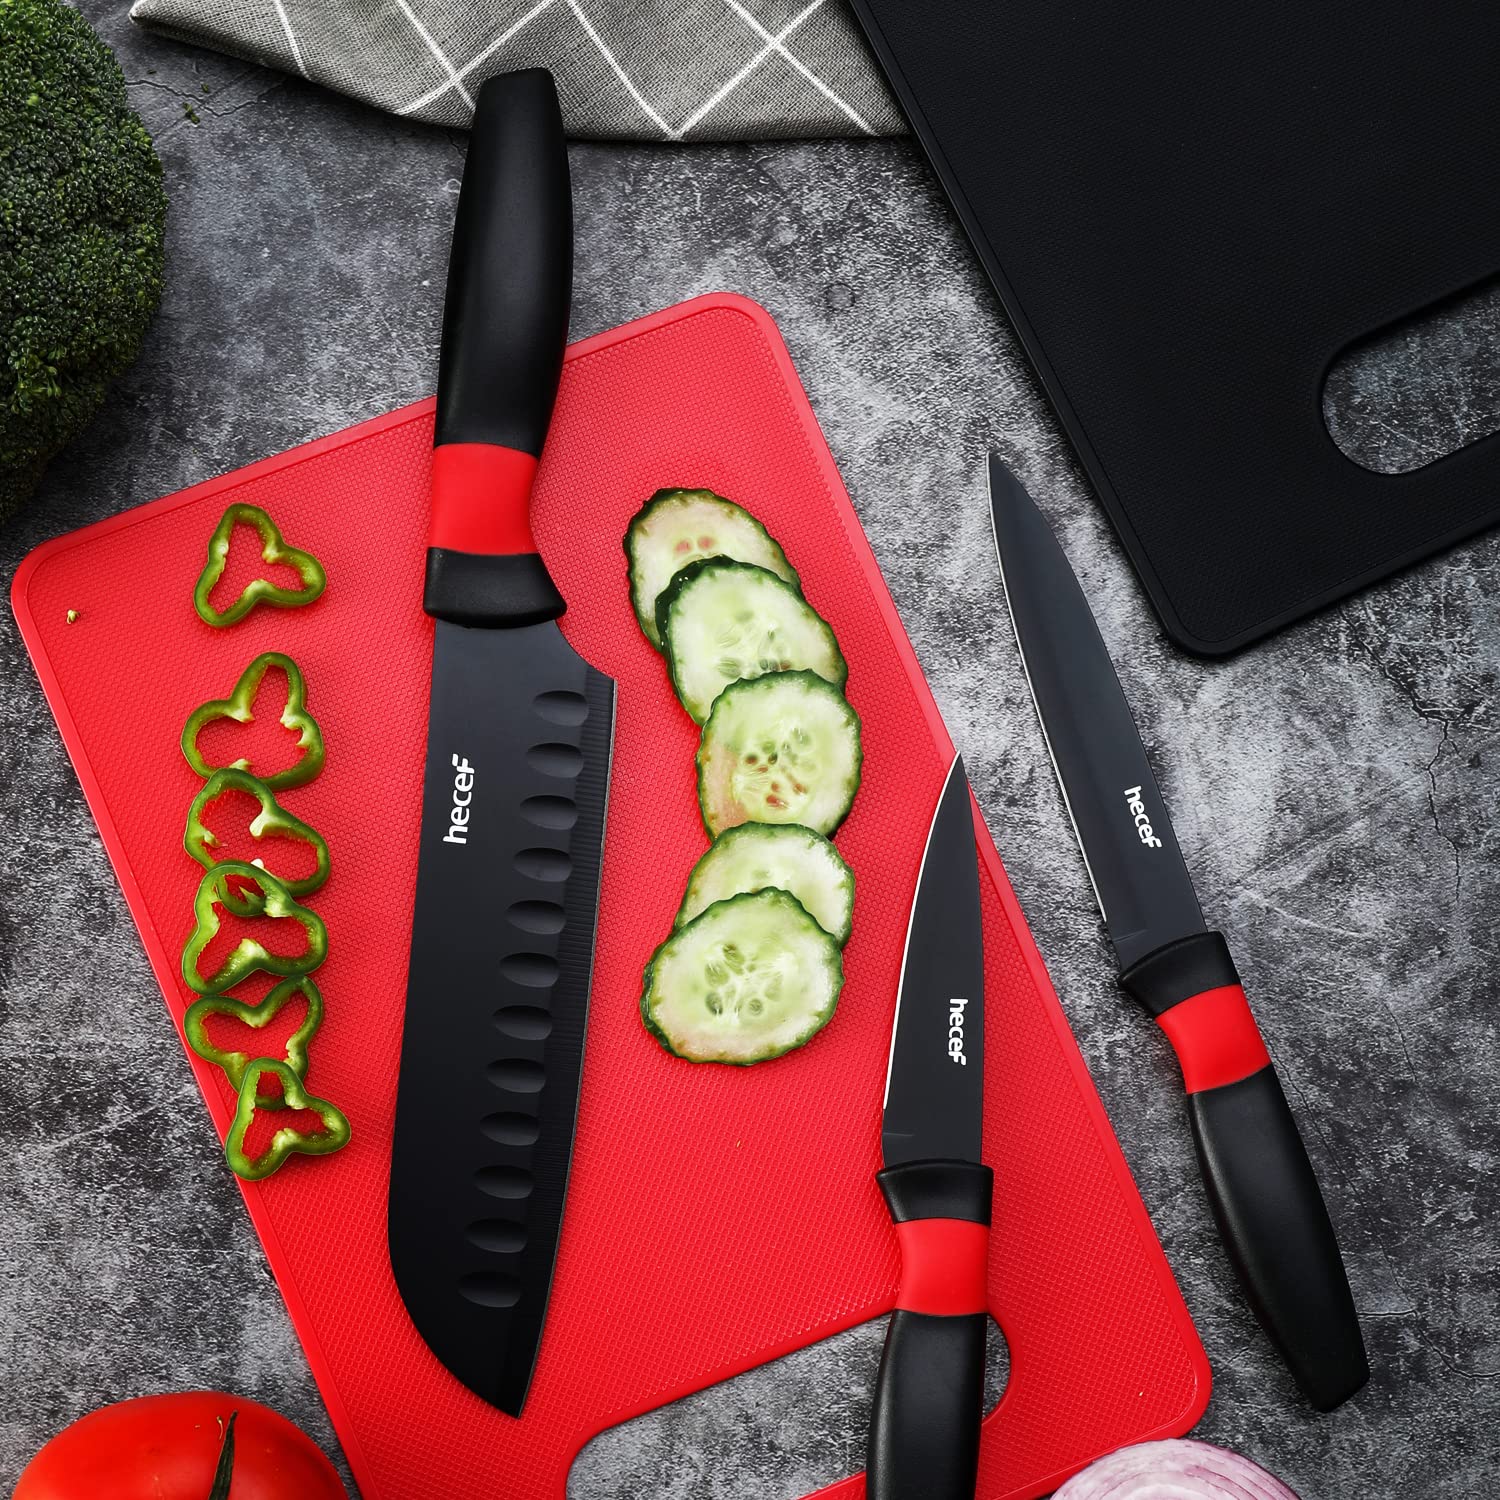 hecef 8-Piece Unique Kitchen knife Set, Knife and Cutting Board Set- 3 Black Stainless Steel Knives with Sheaths and 2 Chopping Mats, Ultra Sharp Knives for Home, Camping, RV, Travel, Picnic and BBQ